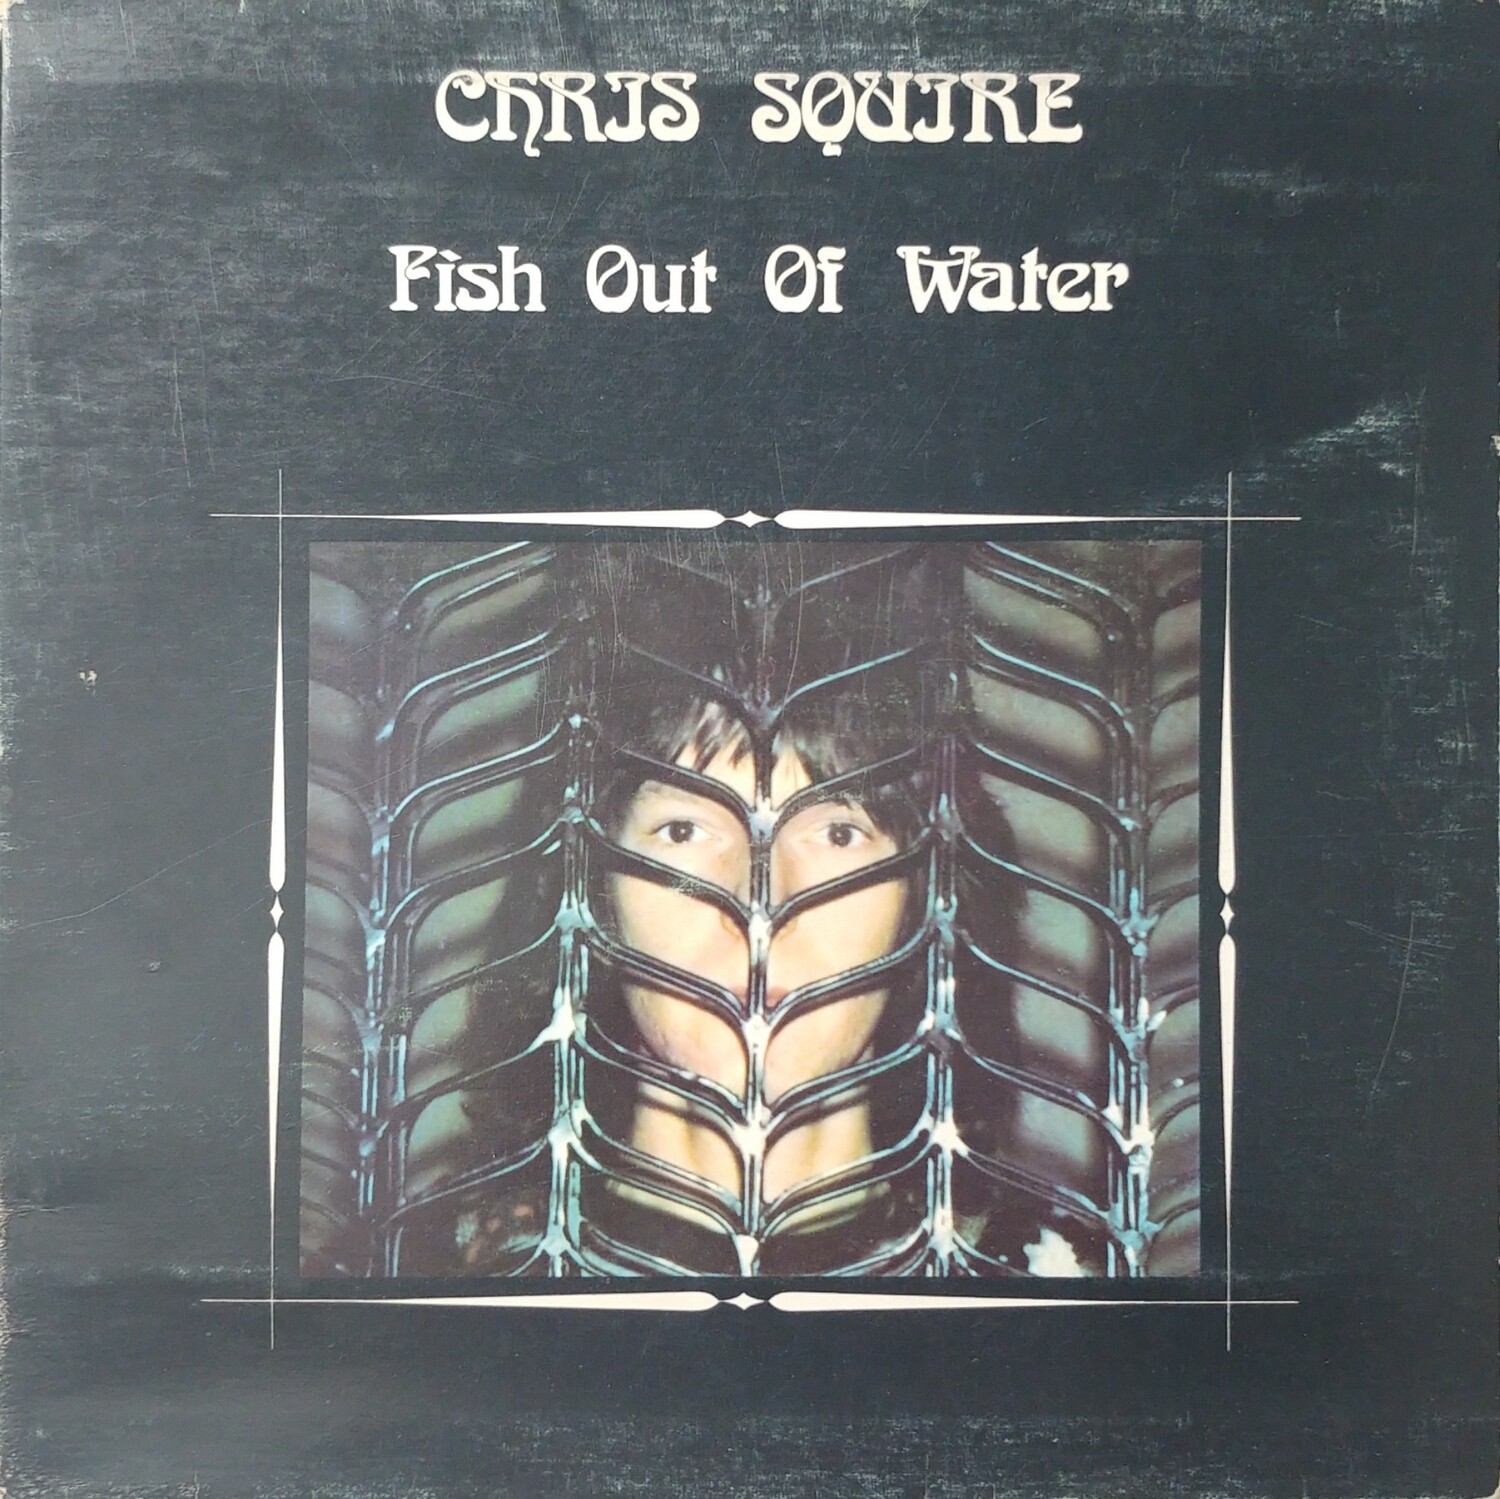 Chris Squire - Fish out of water